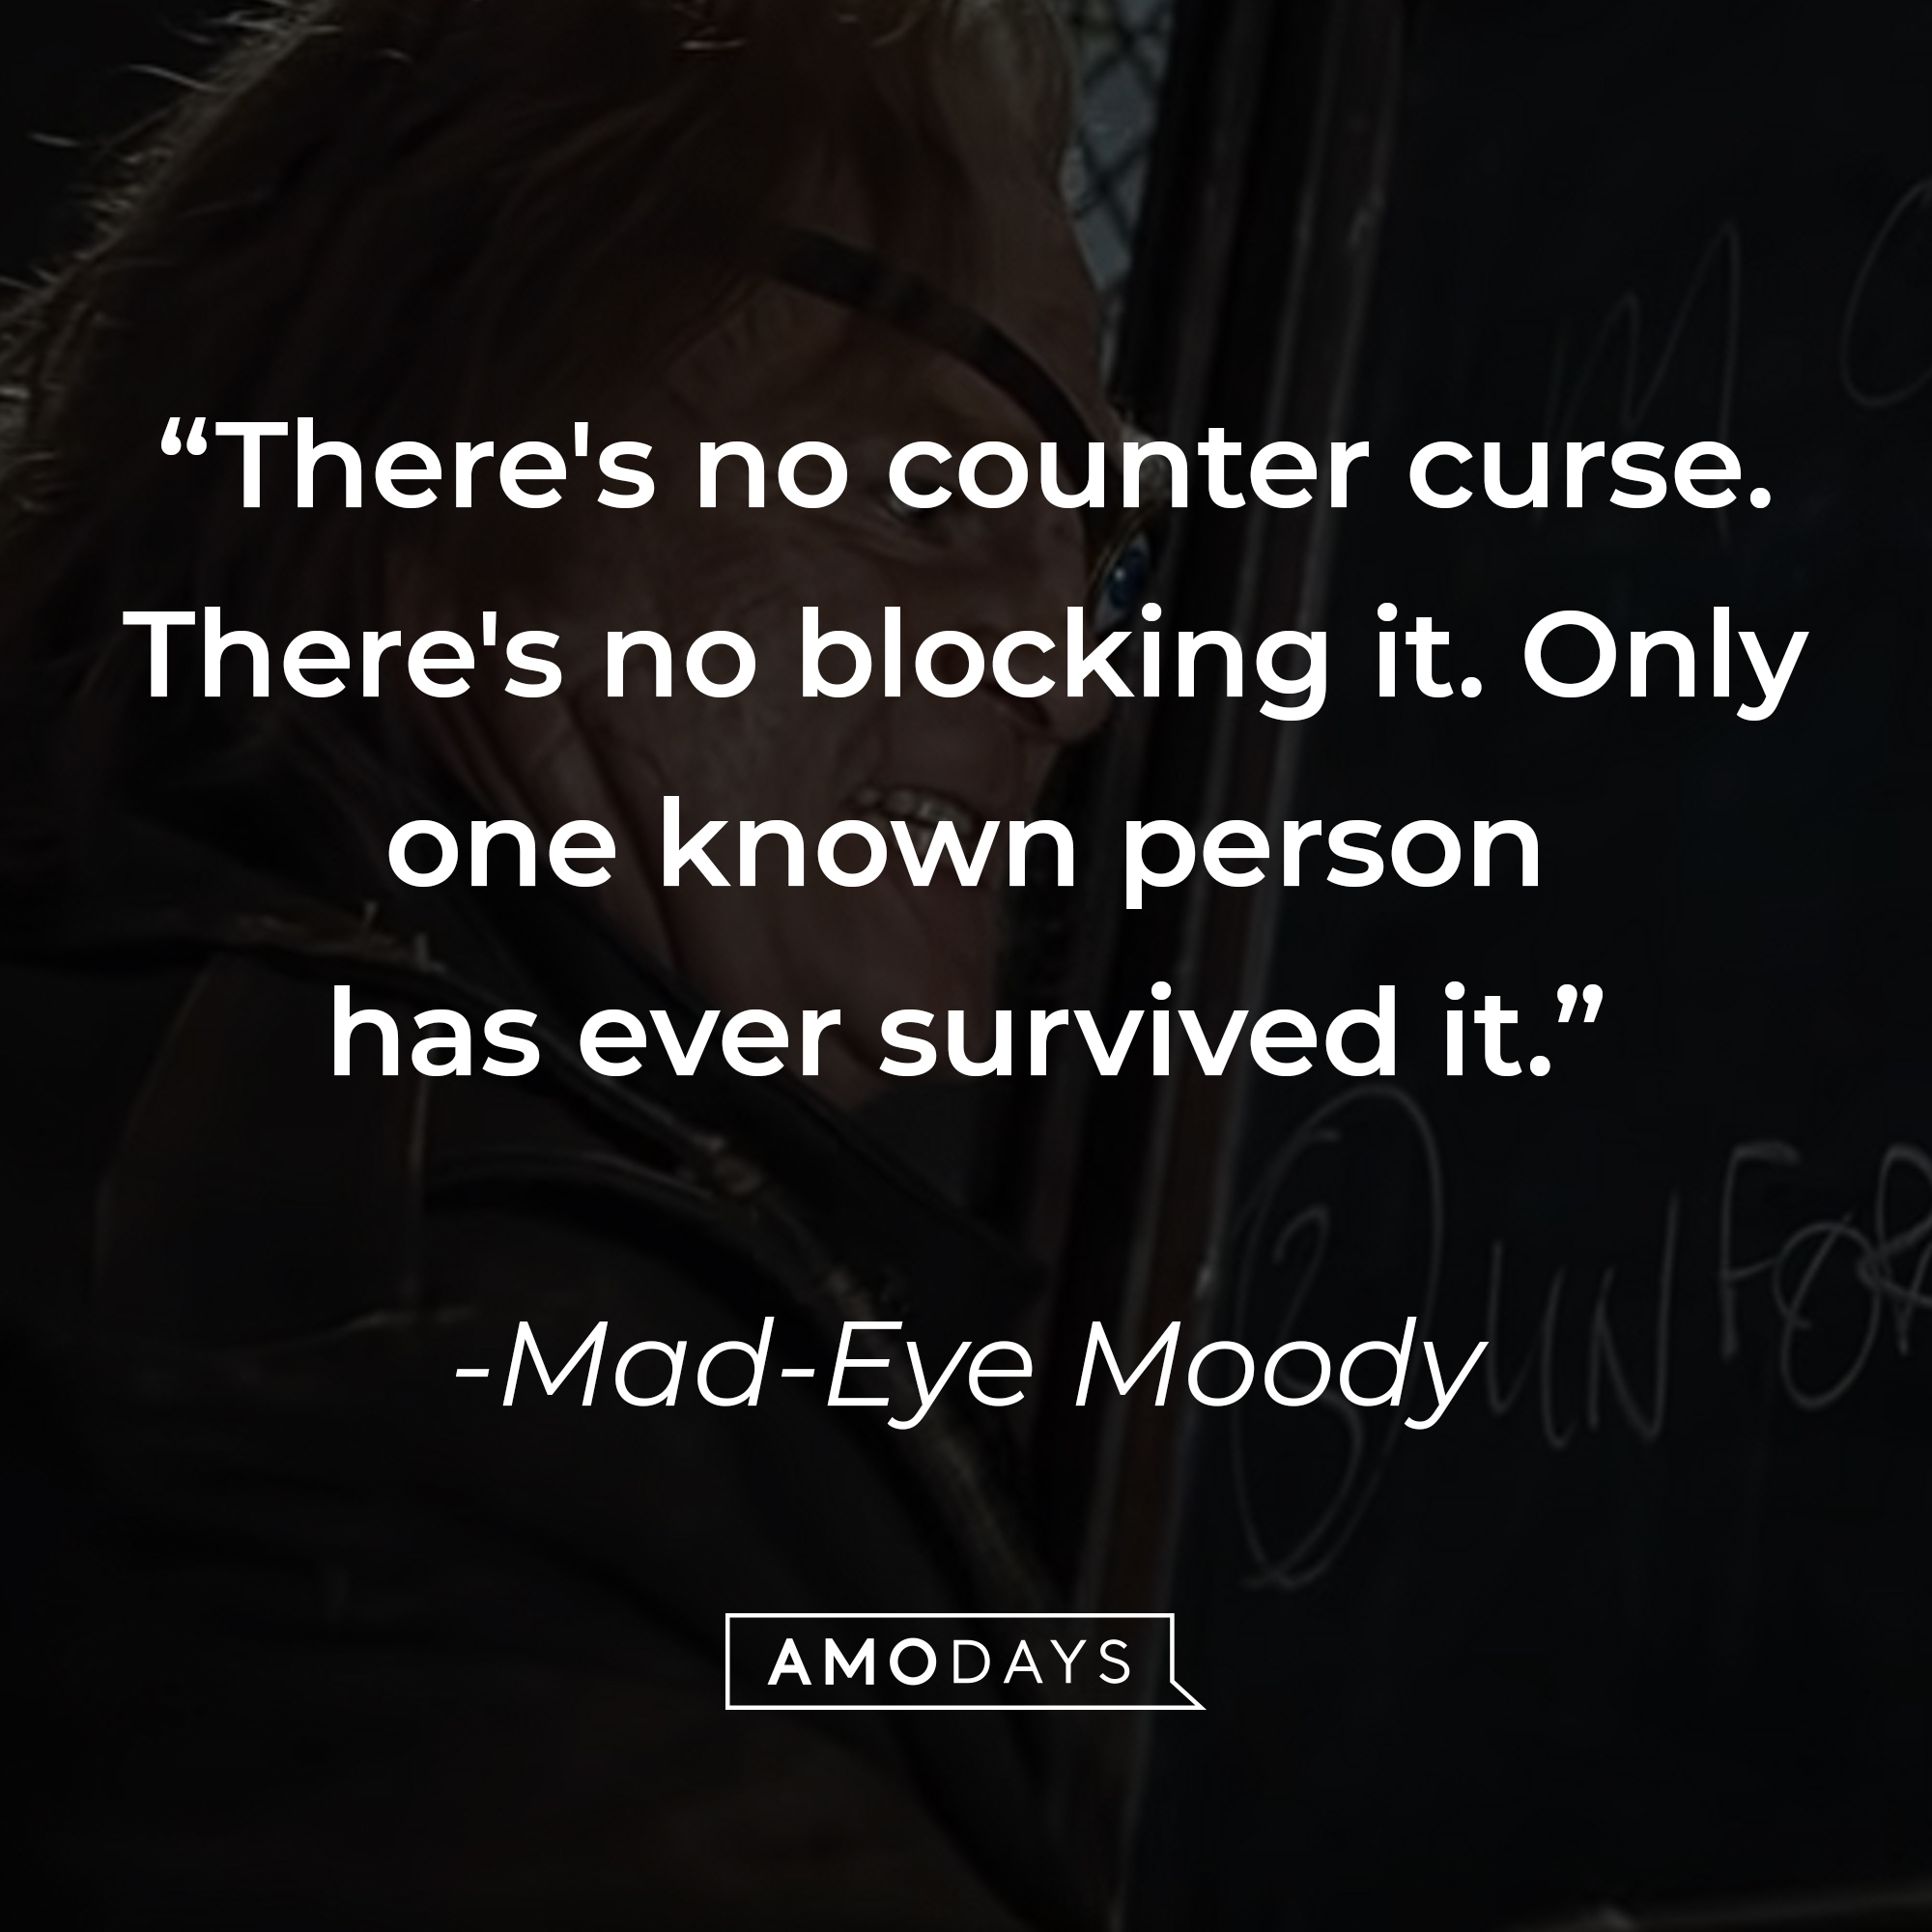 Mad-Eye Moody's quote: "There's no counter curse. There's no blocking it. Only one known person has ever survived it." | Source: youtube.com/harrypotter